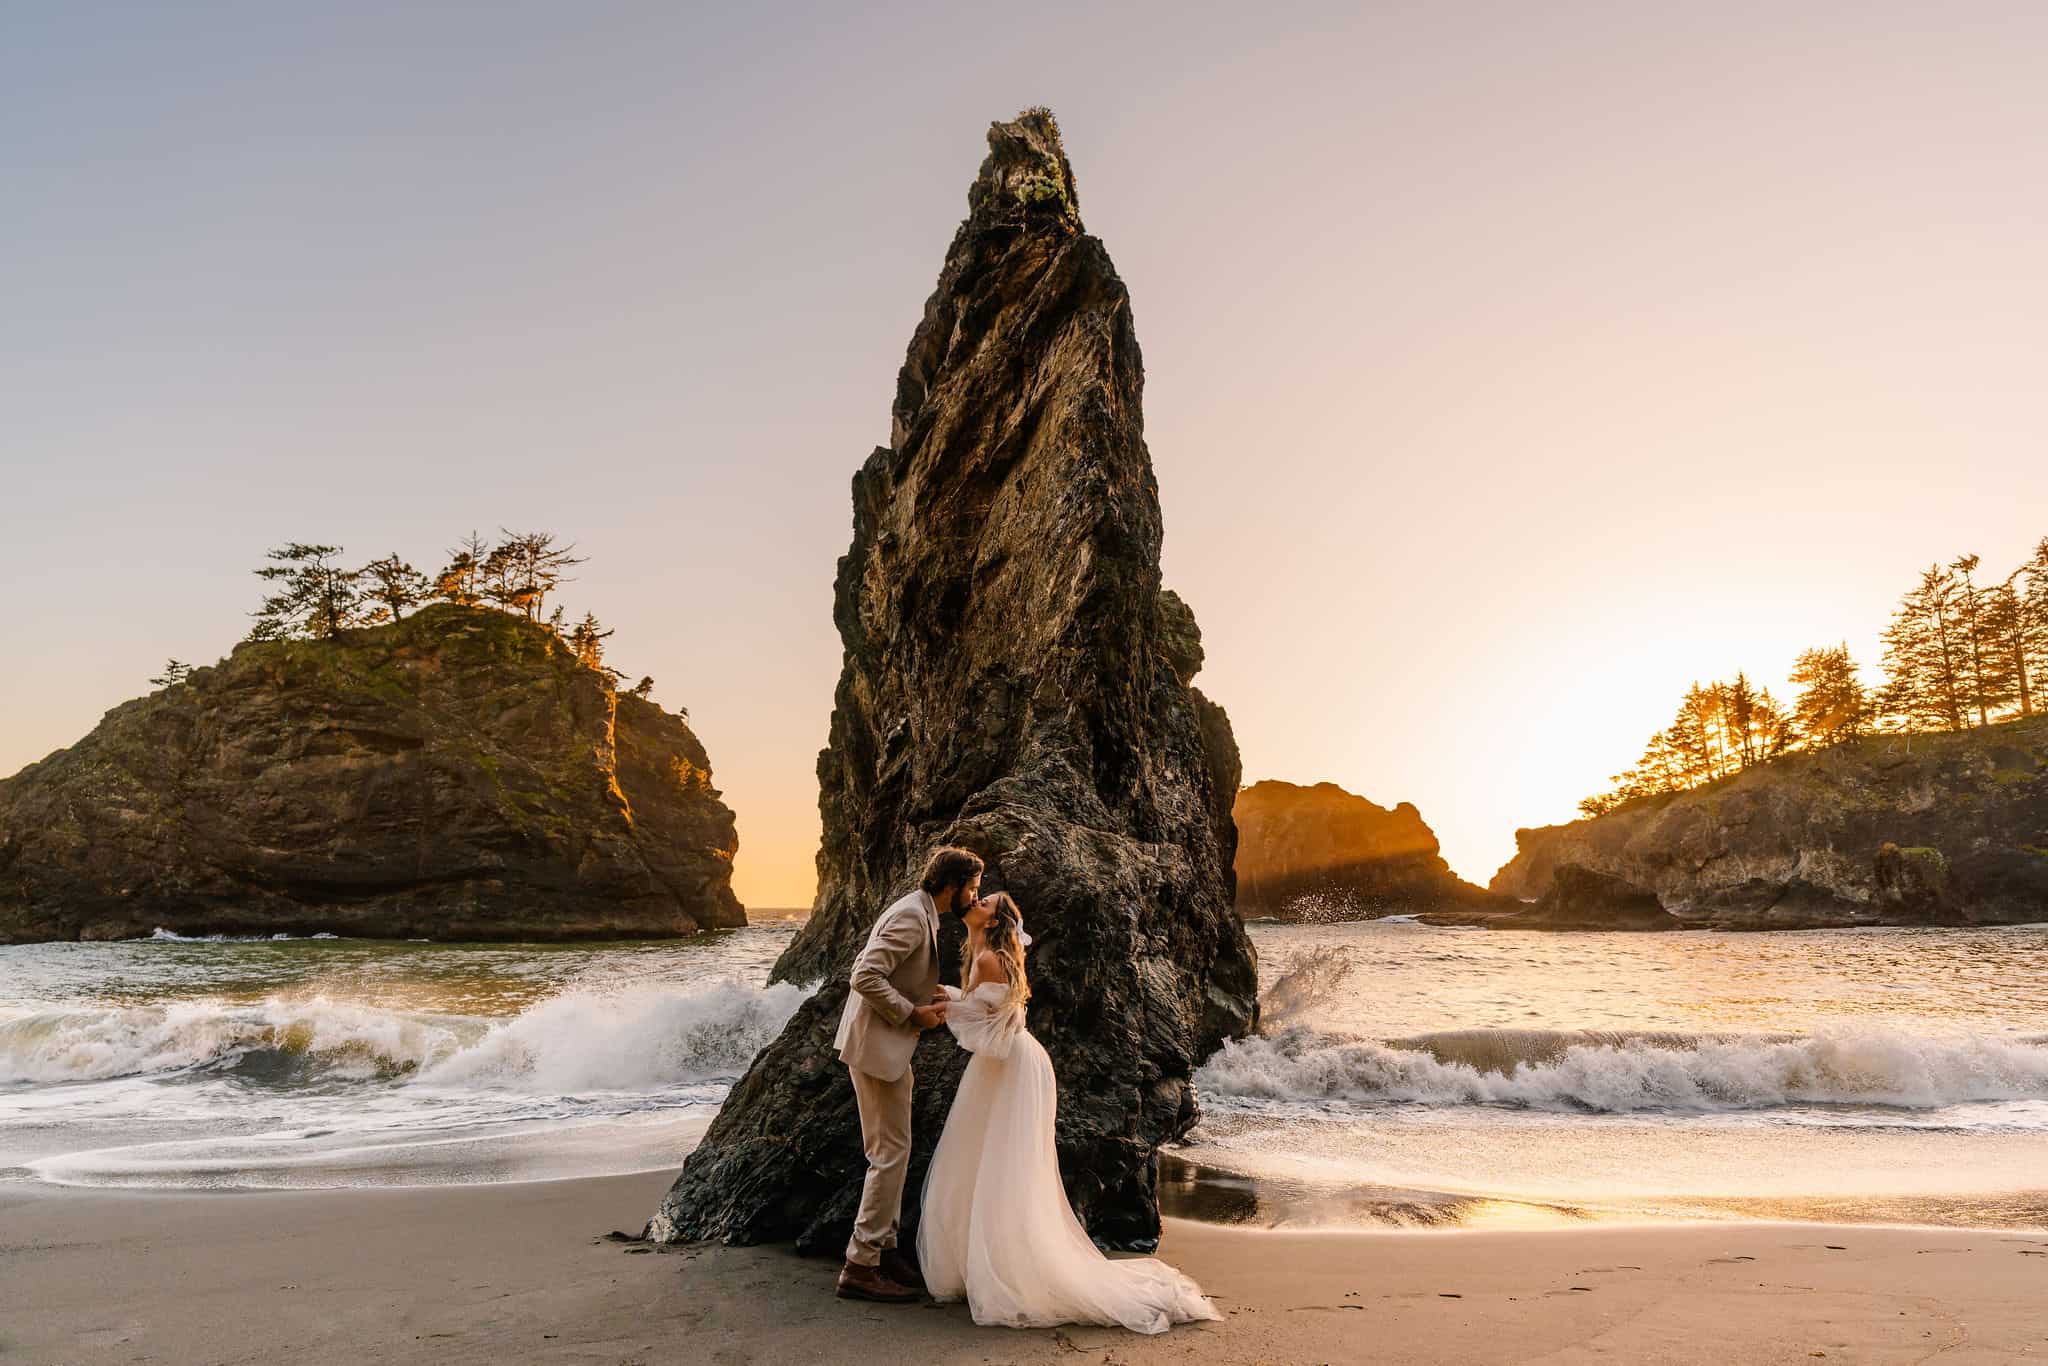 After learning how to elope in Oregon bride and groom embrace in front of a jagged sea rock as the sun sets behind them